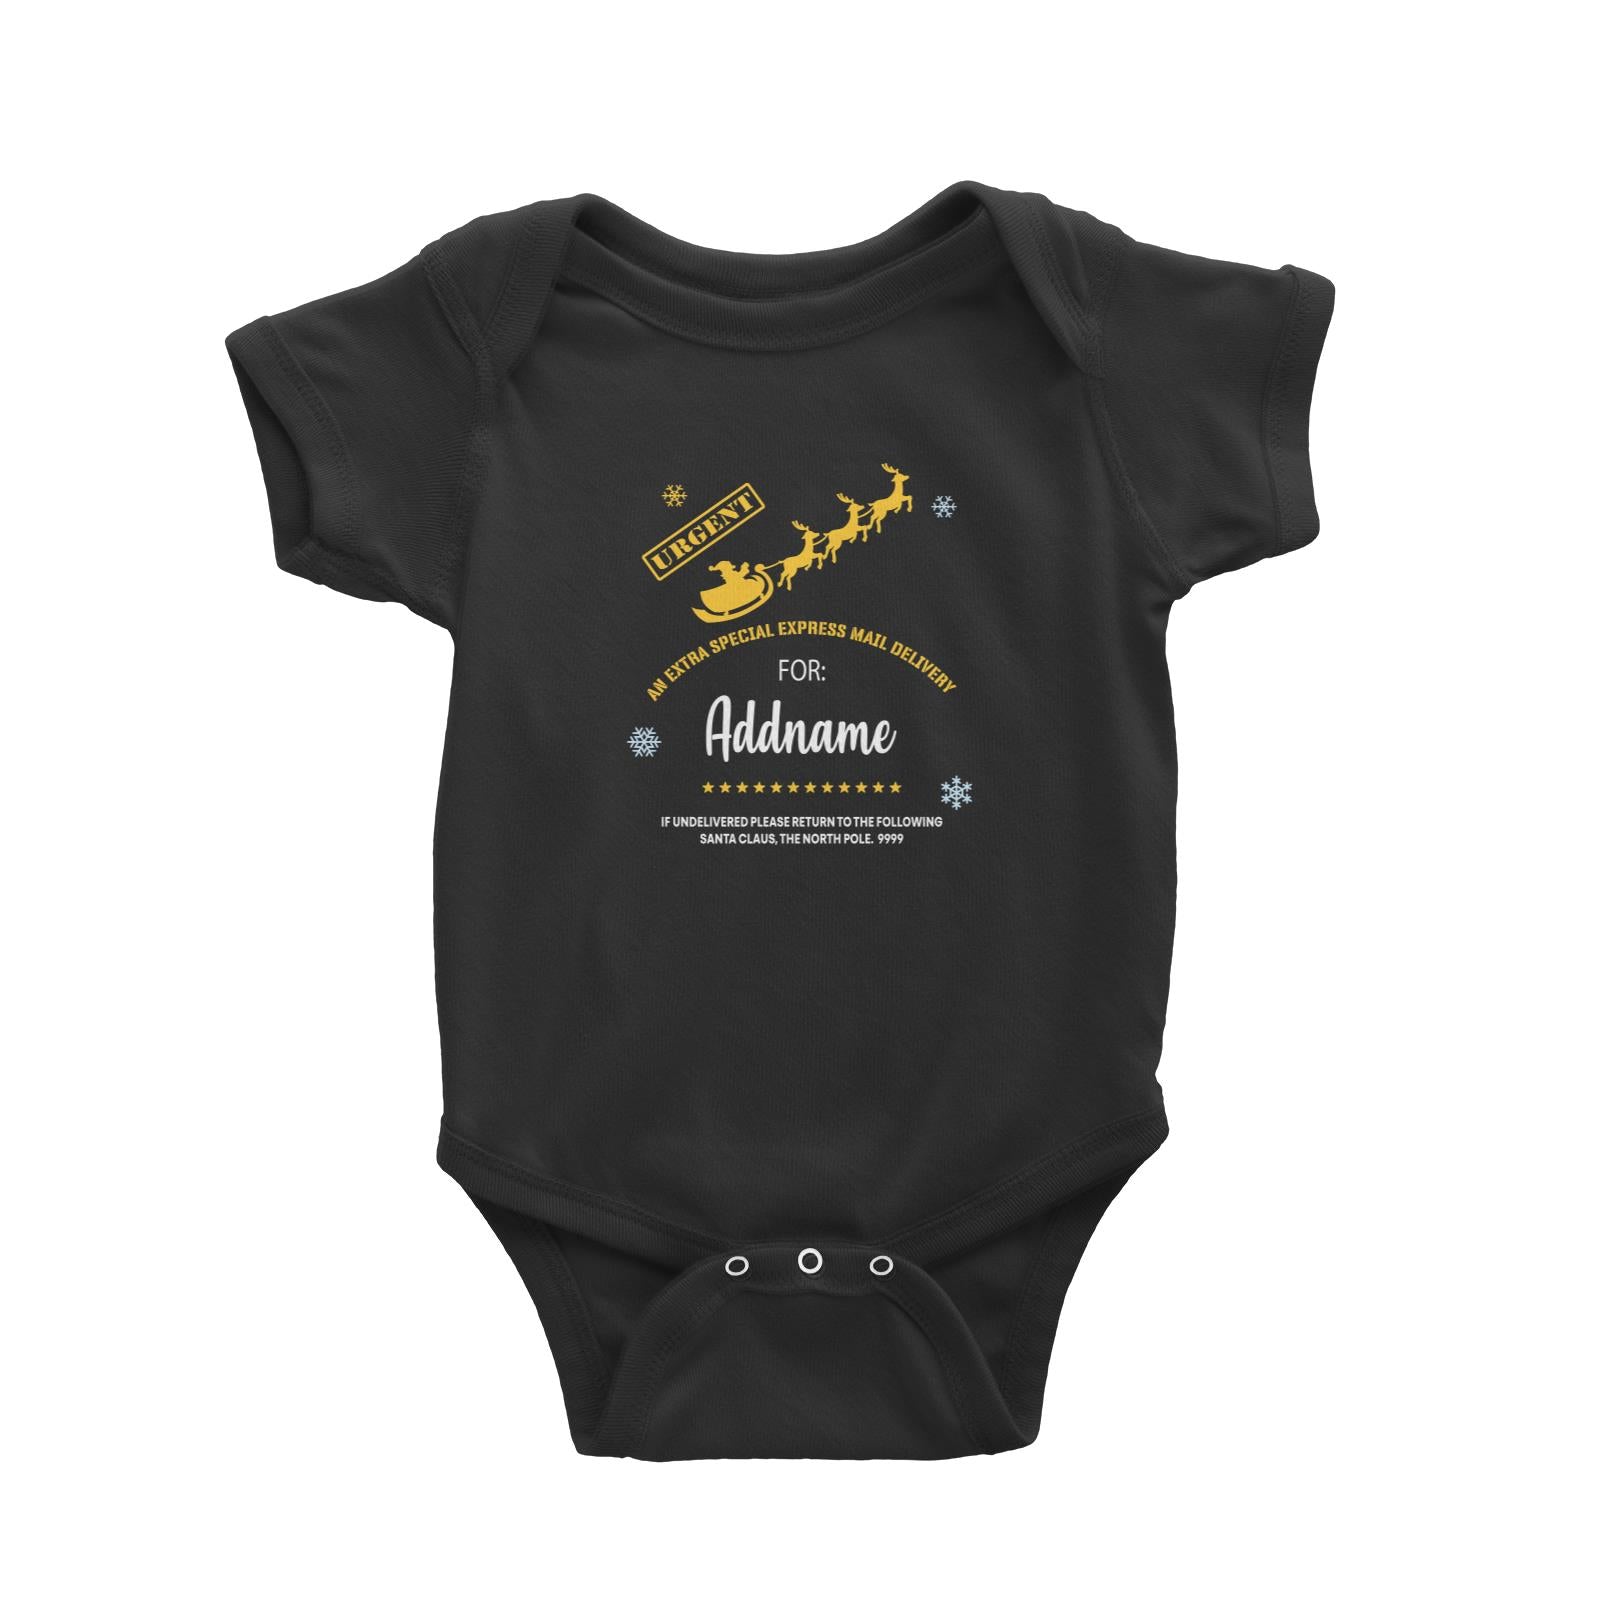 Xmas An Extra Special Express Mail Delivery Baby Romper